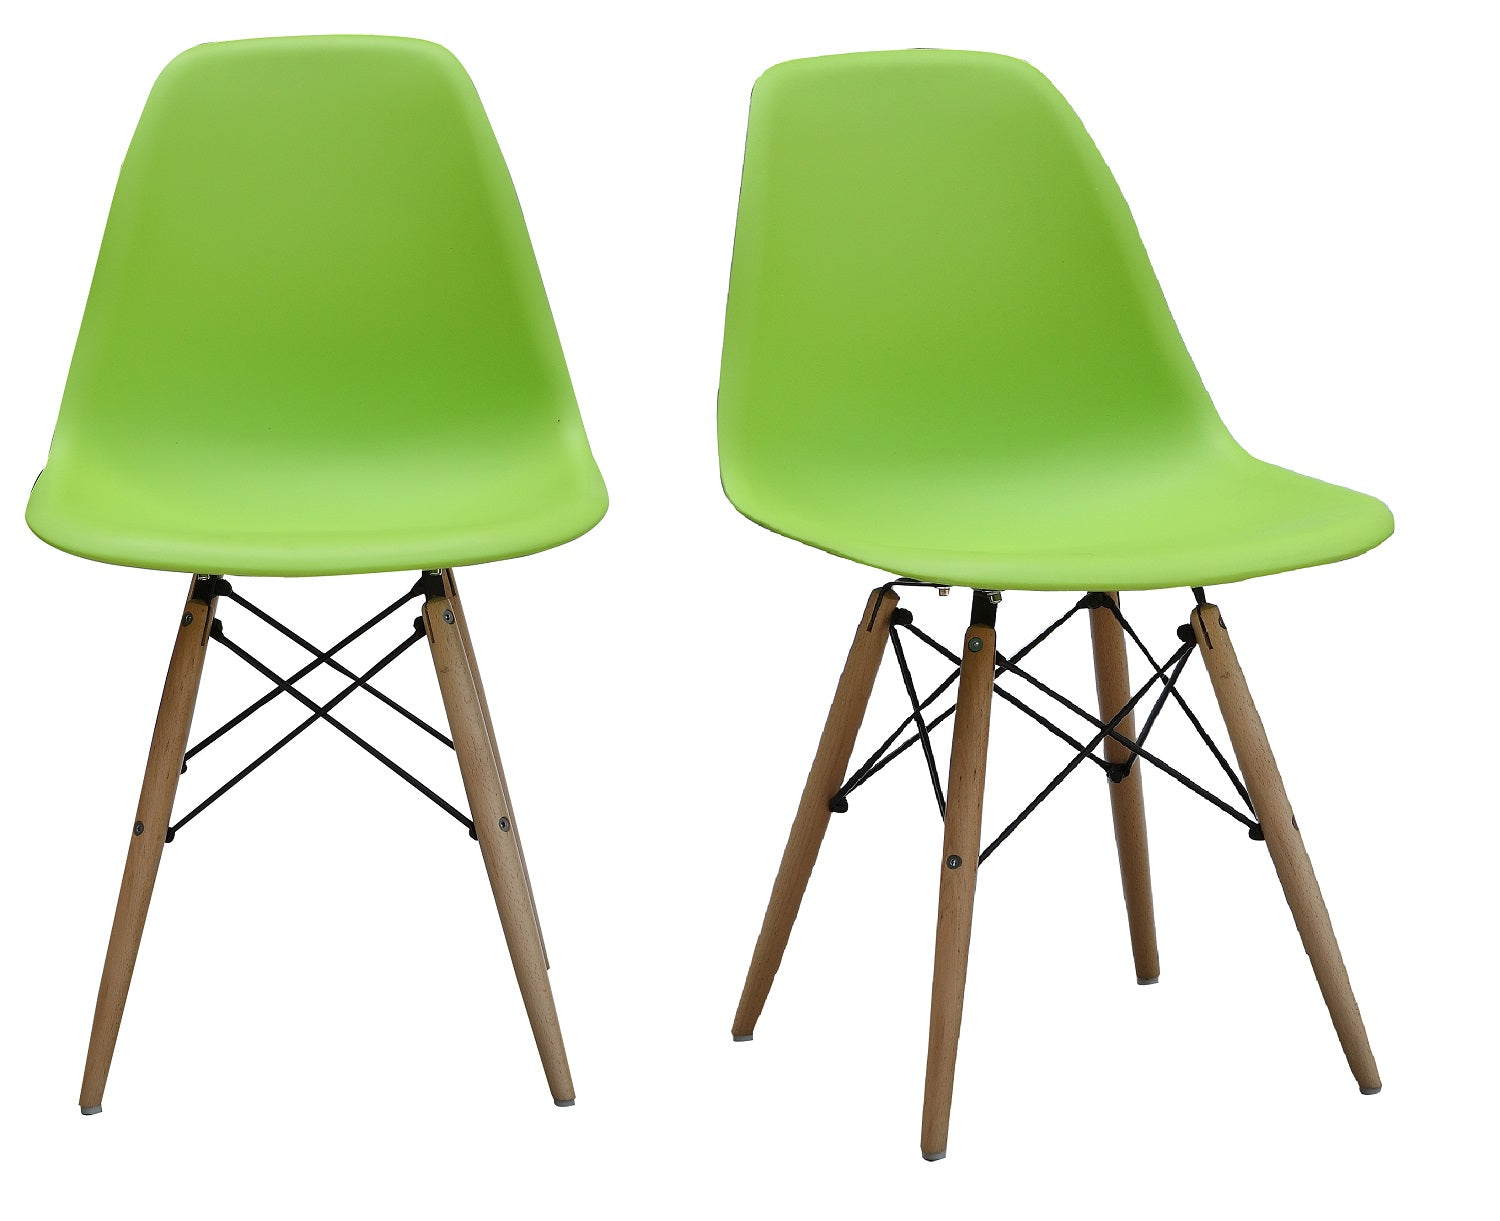 ViscoLogic Prague High Back Molded Plastic Side Dining Chair with Natural Wood Legs (Set of 2 Lawn Green)